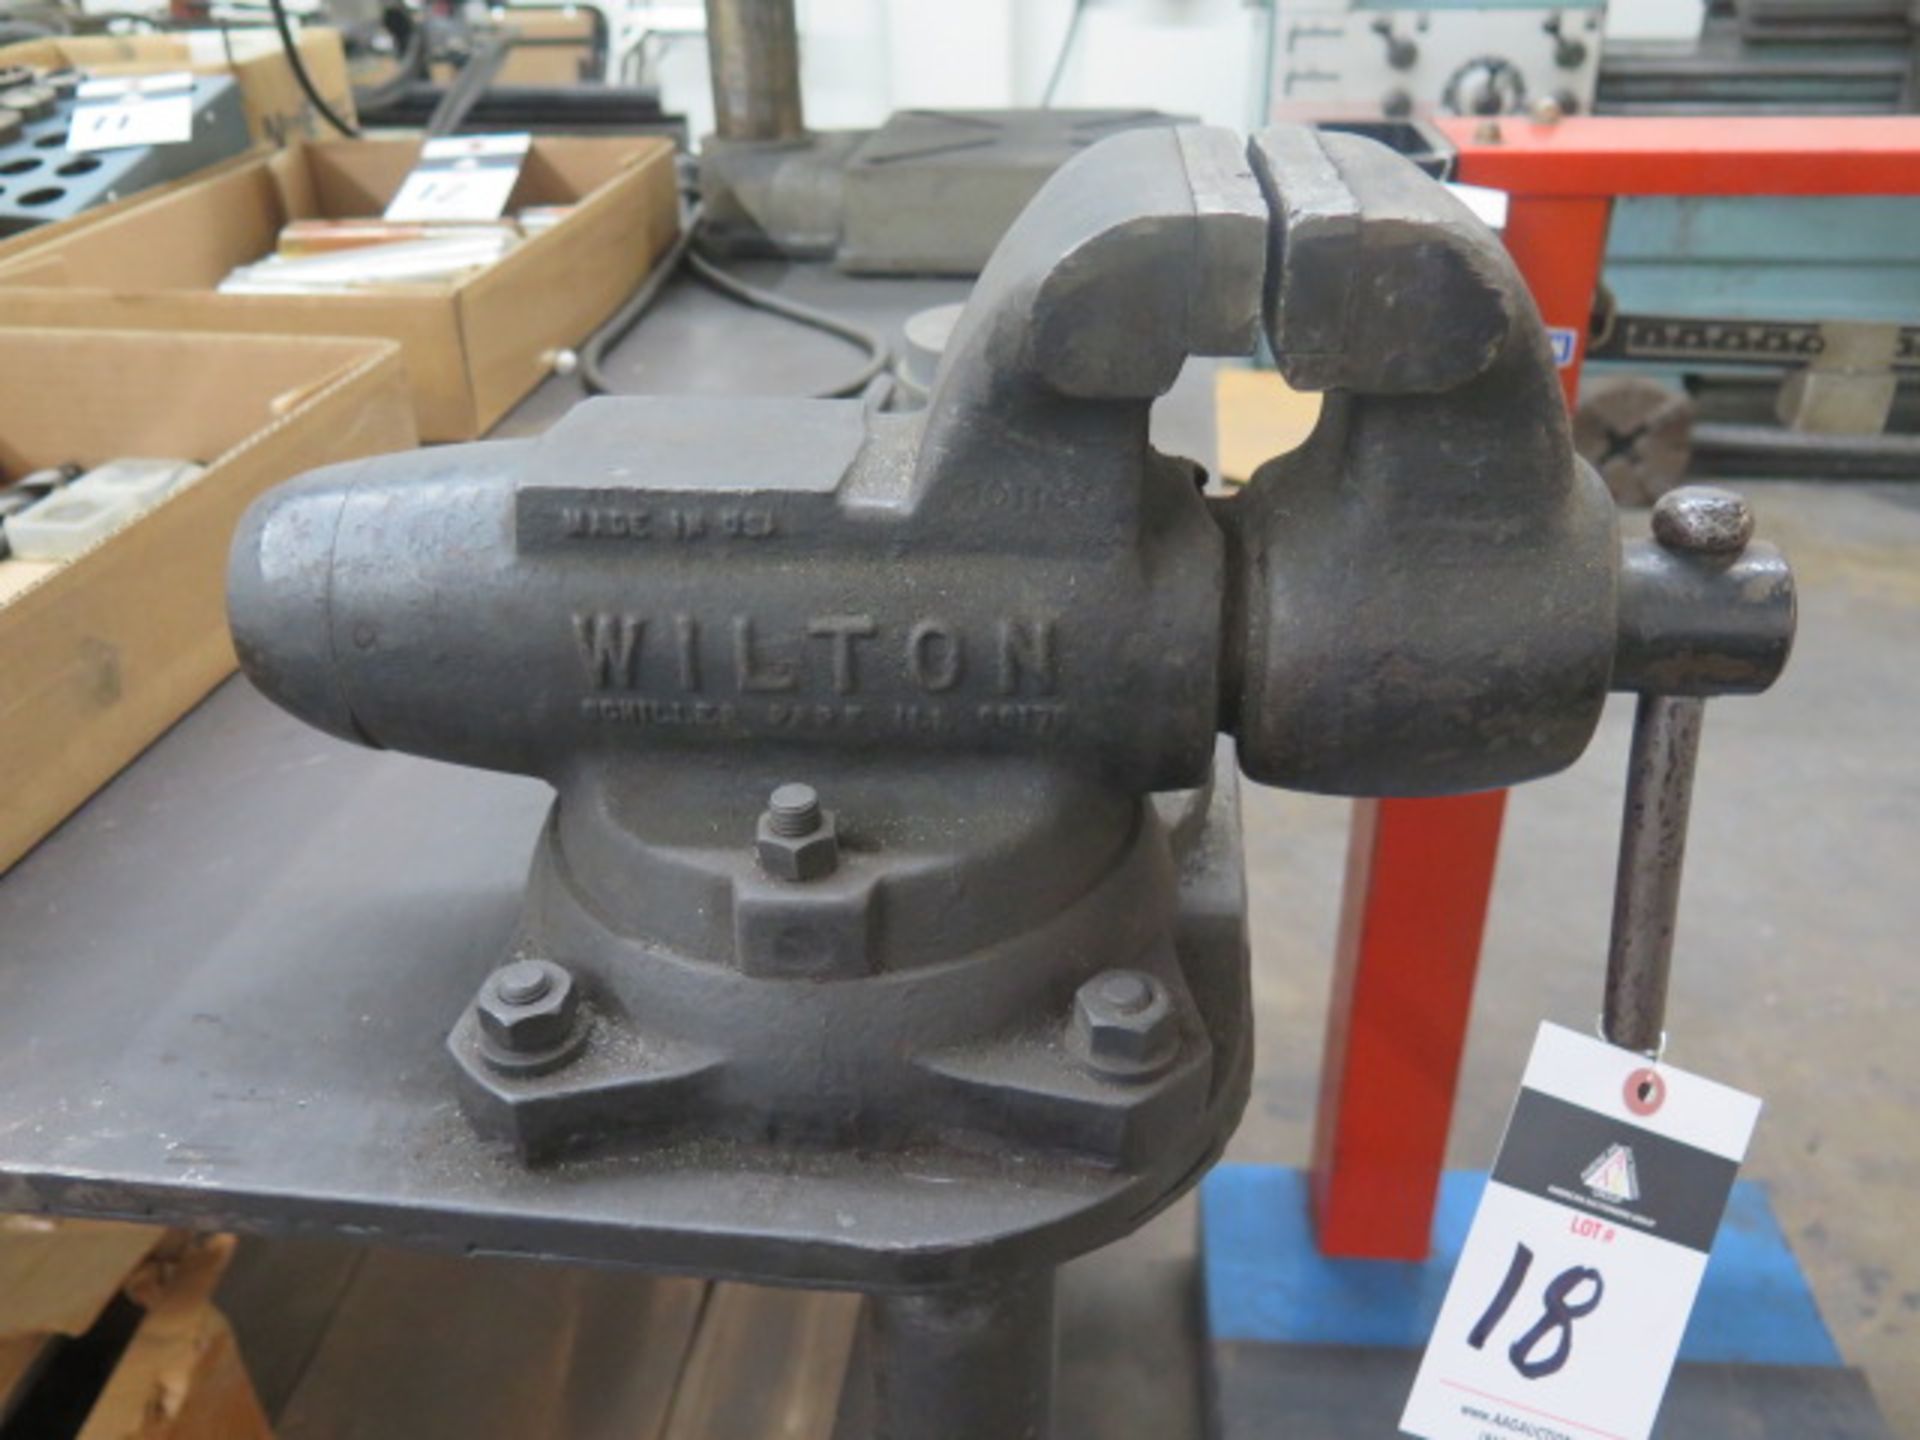 4’ x 8’ Steel Table w/ Wilton Bench Vise - Image 2 of 2